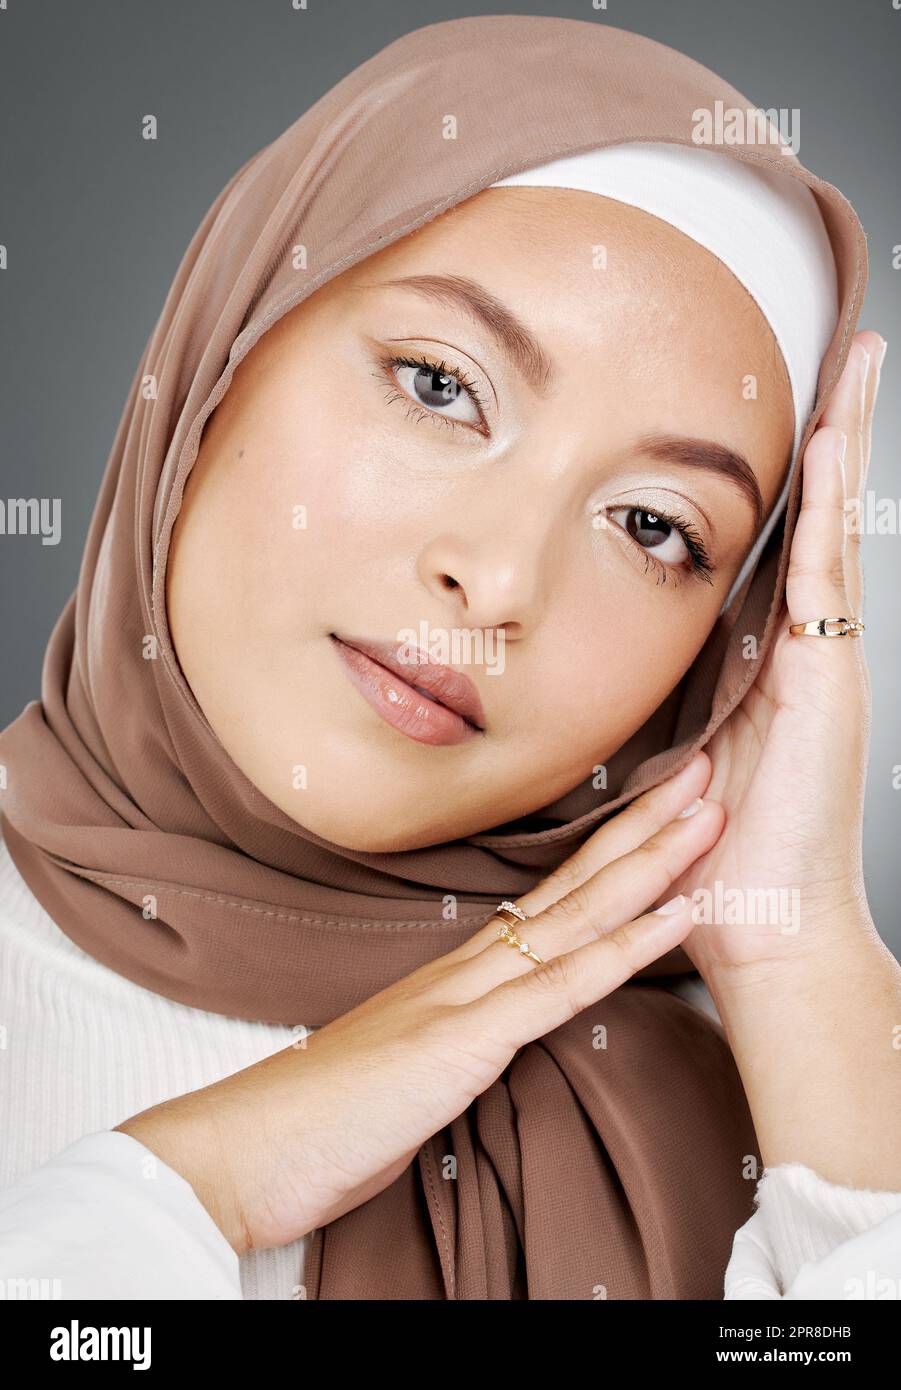 Portrait of a glowing elegant muslim womans face isolated against grey studio background. Young woman wearing a hijab or headscarf, showing her eyelash extensions, jewellery and skin routine Stock Photo